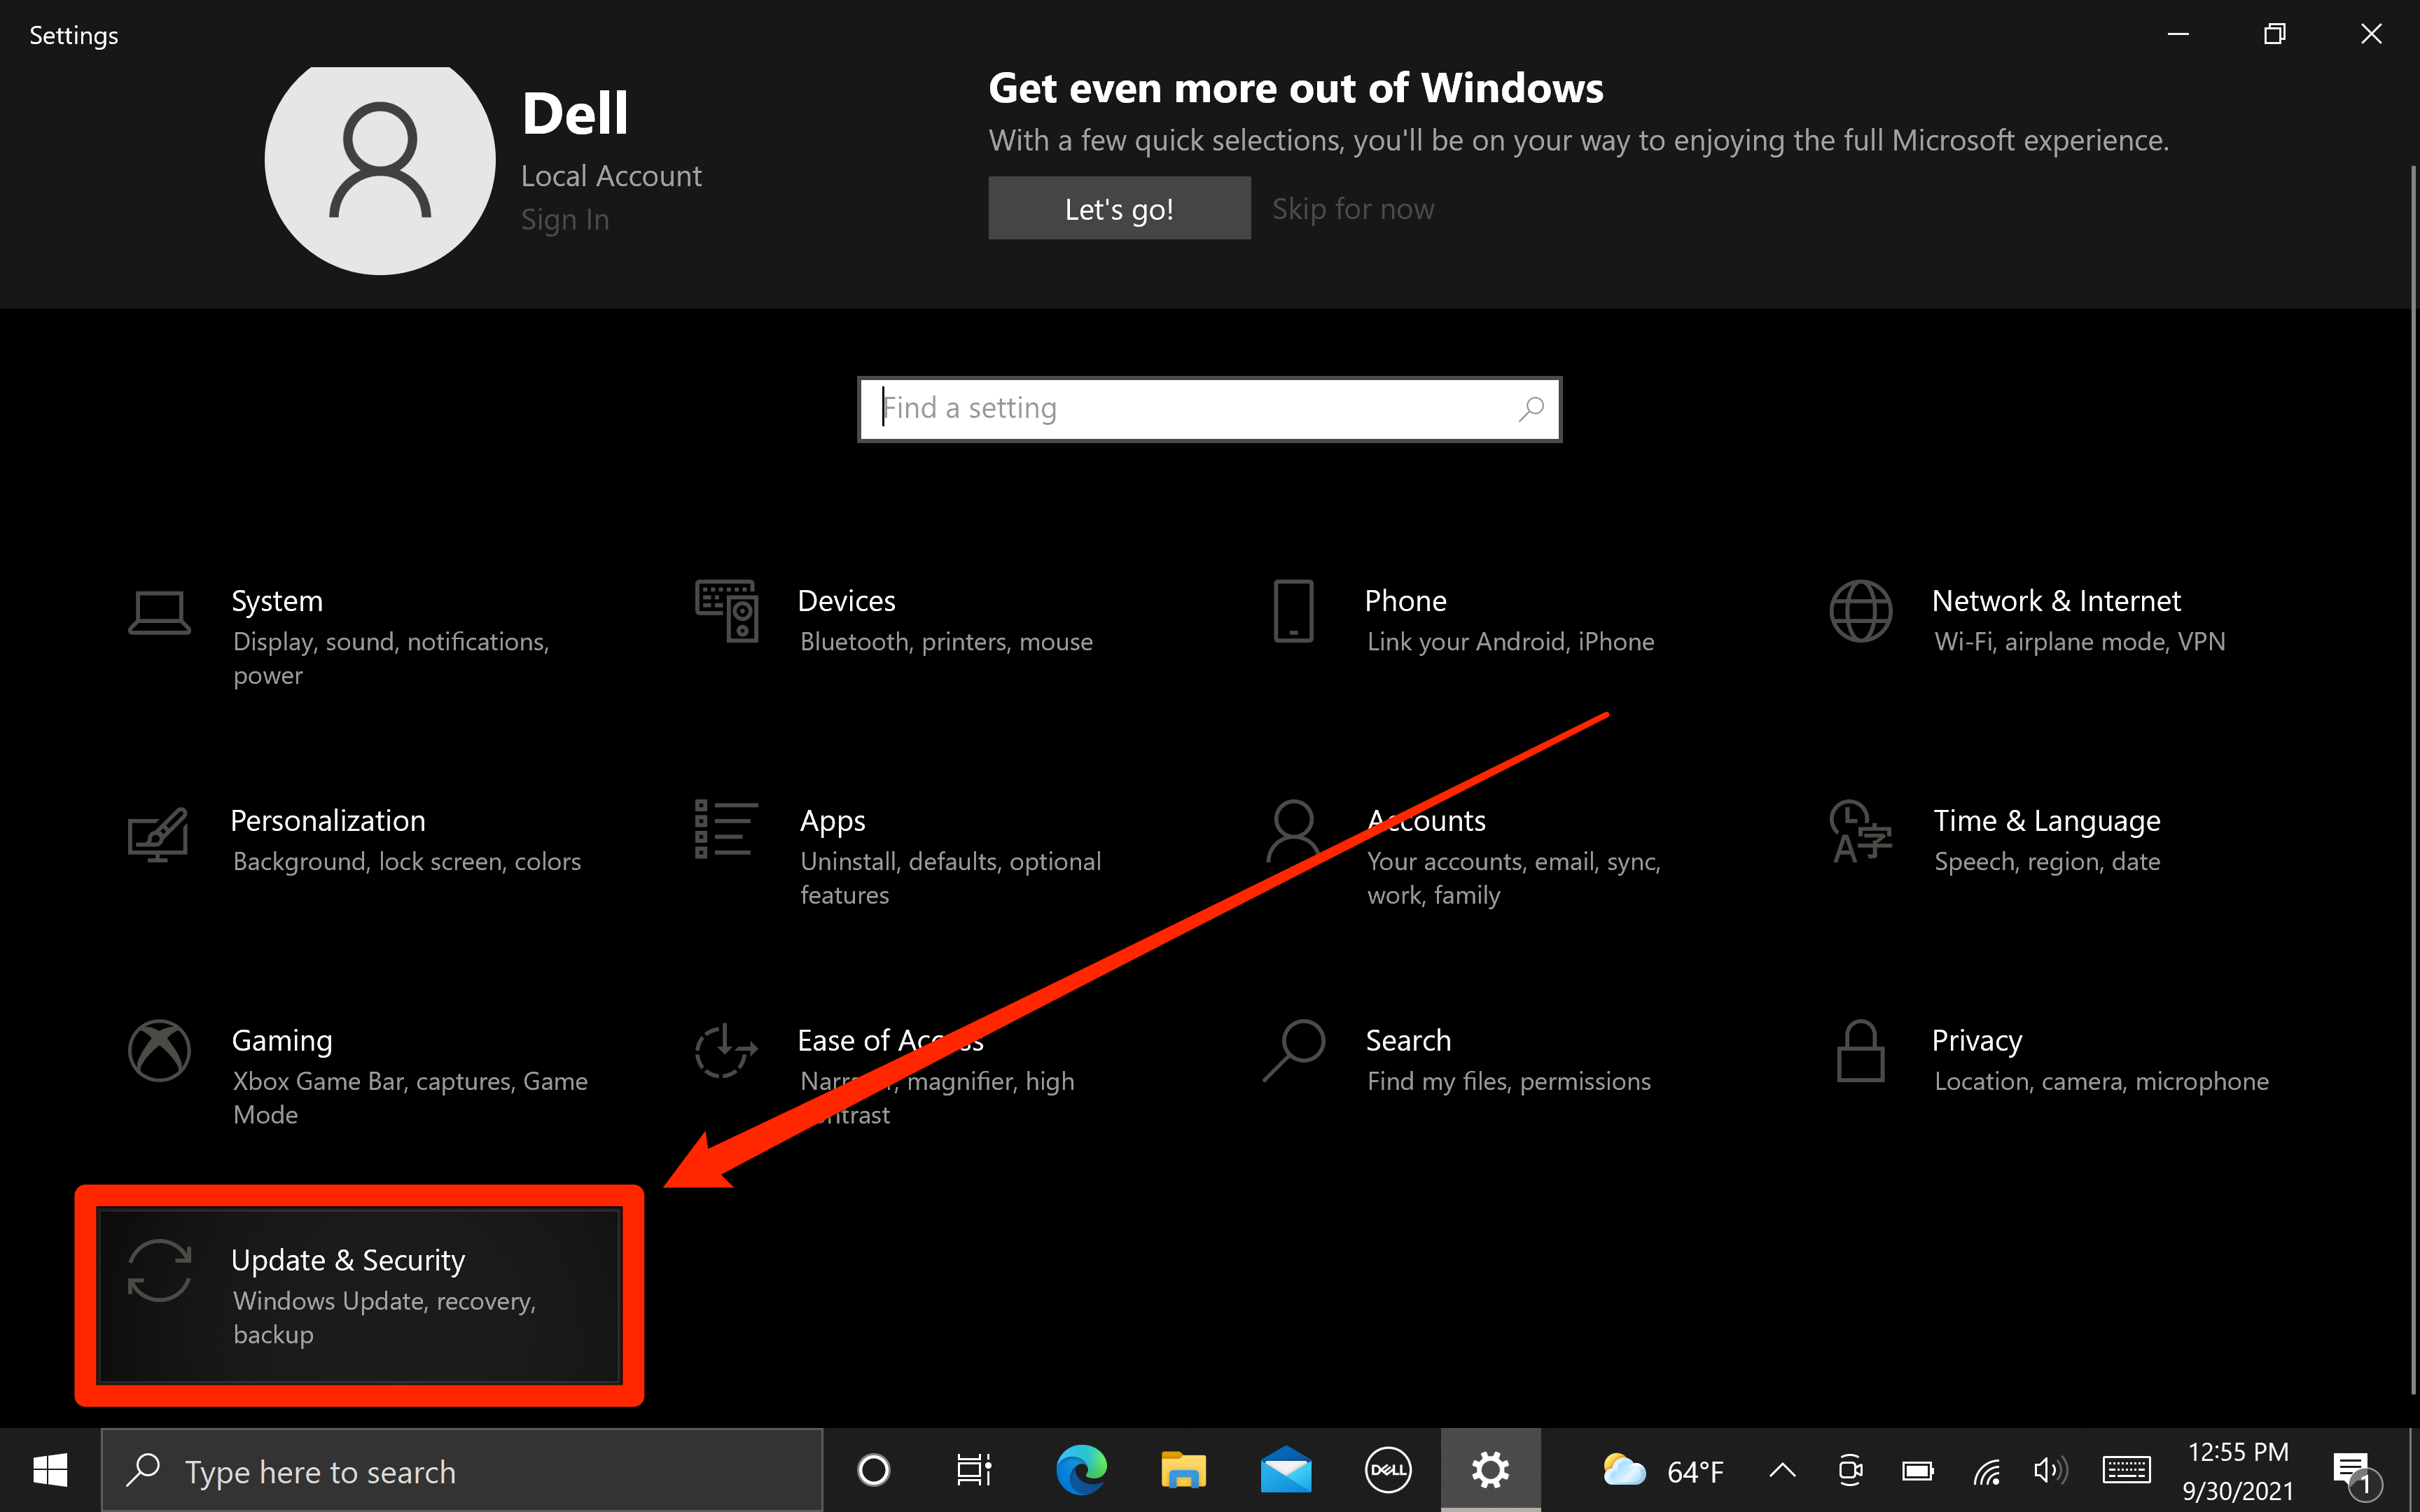 The Windows 10 Settings app. The "Updates" option is highlighted.